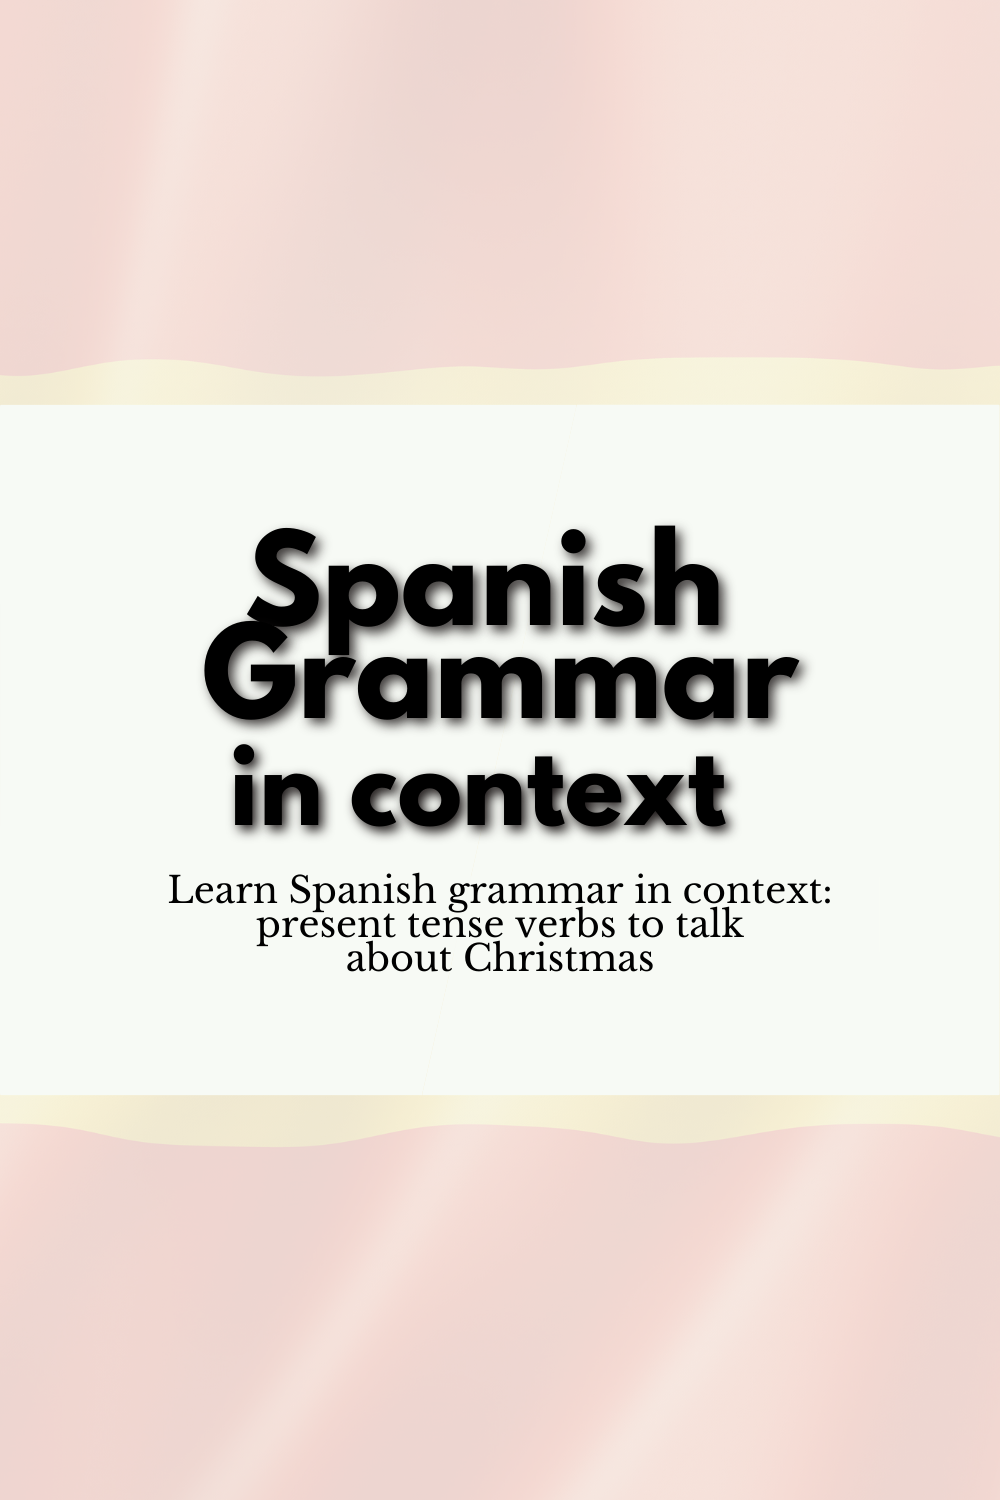 Spanish grammar in context: present tense verbs to talk about Christmas